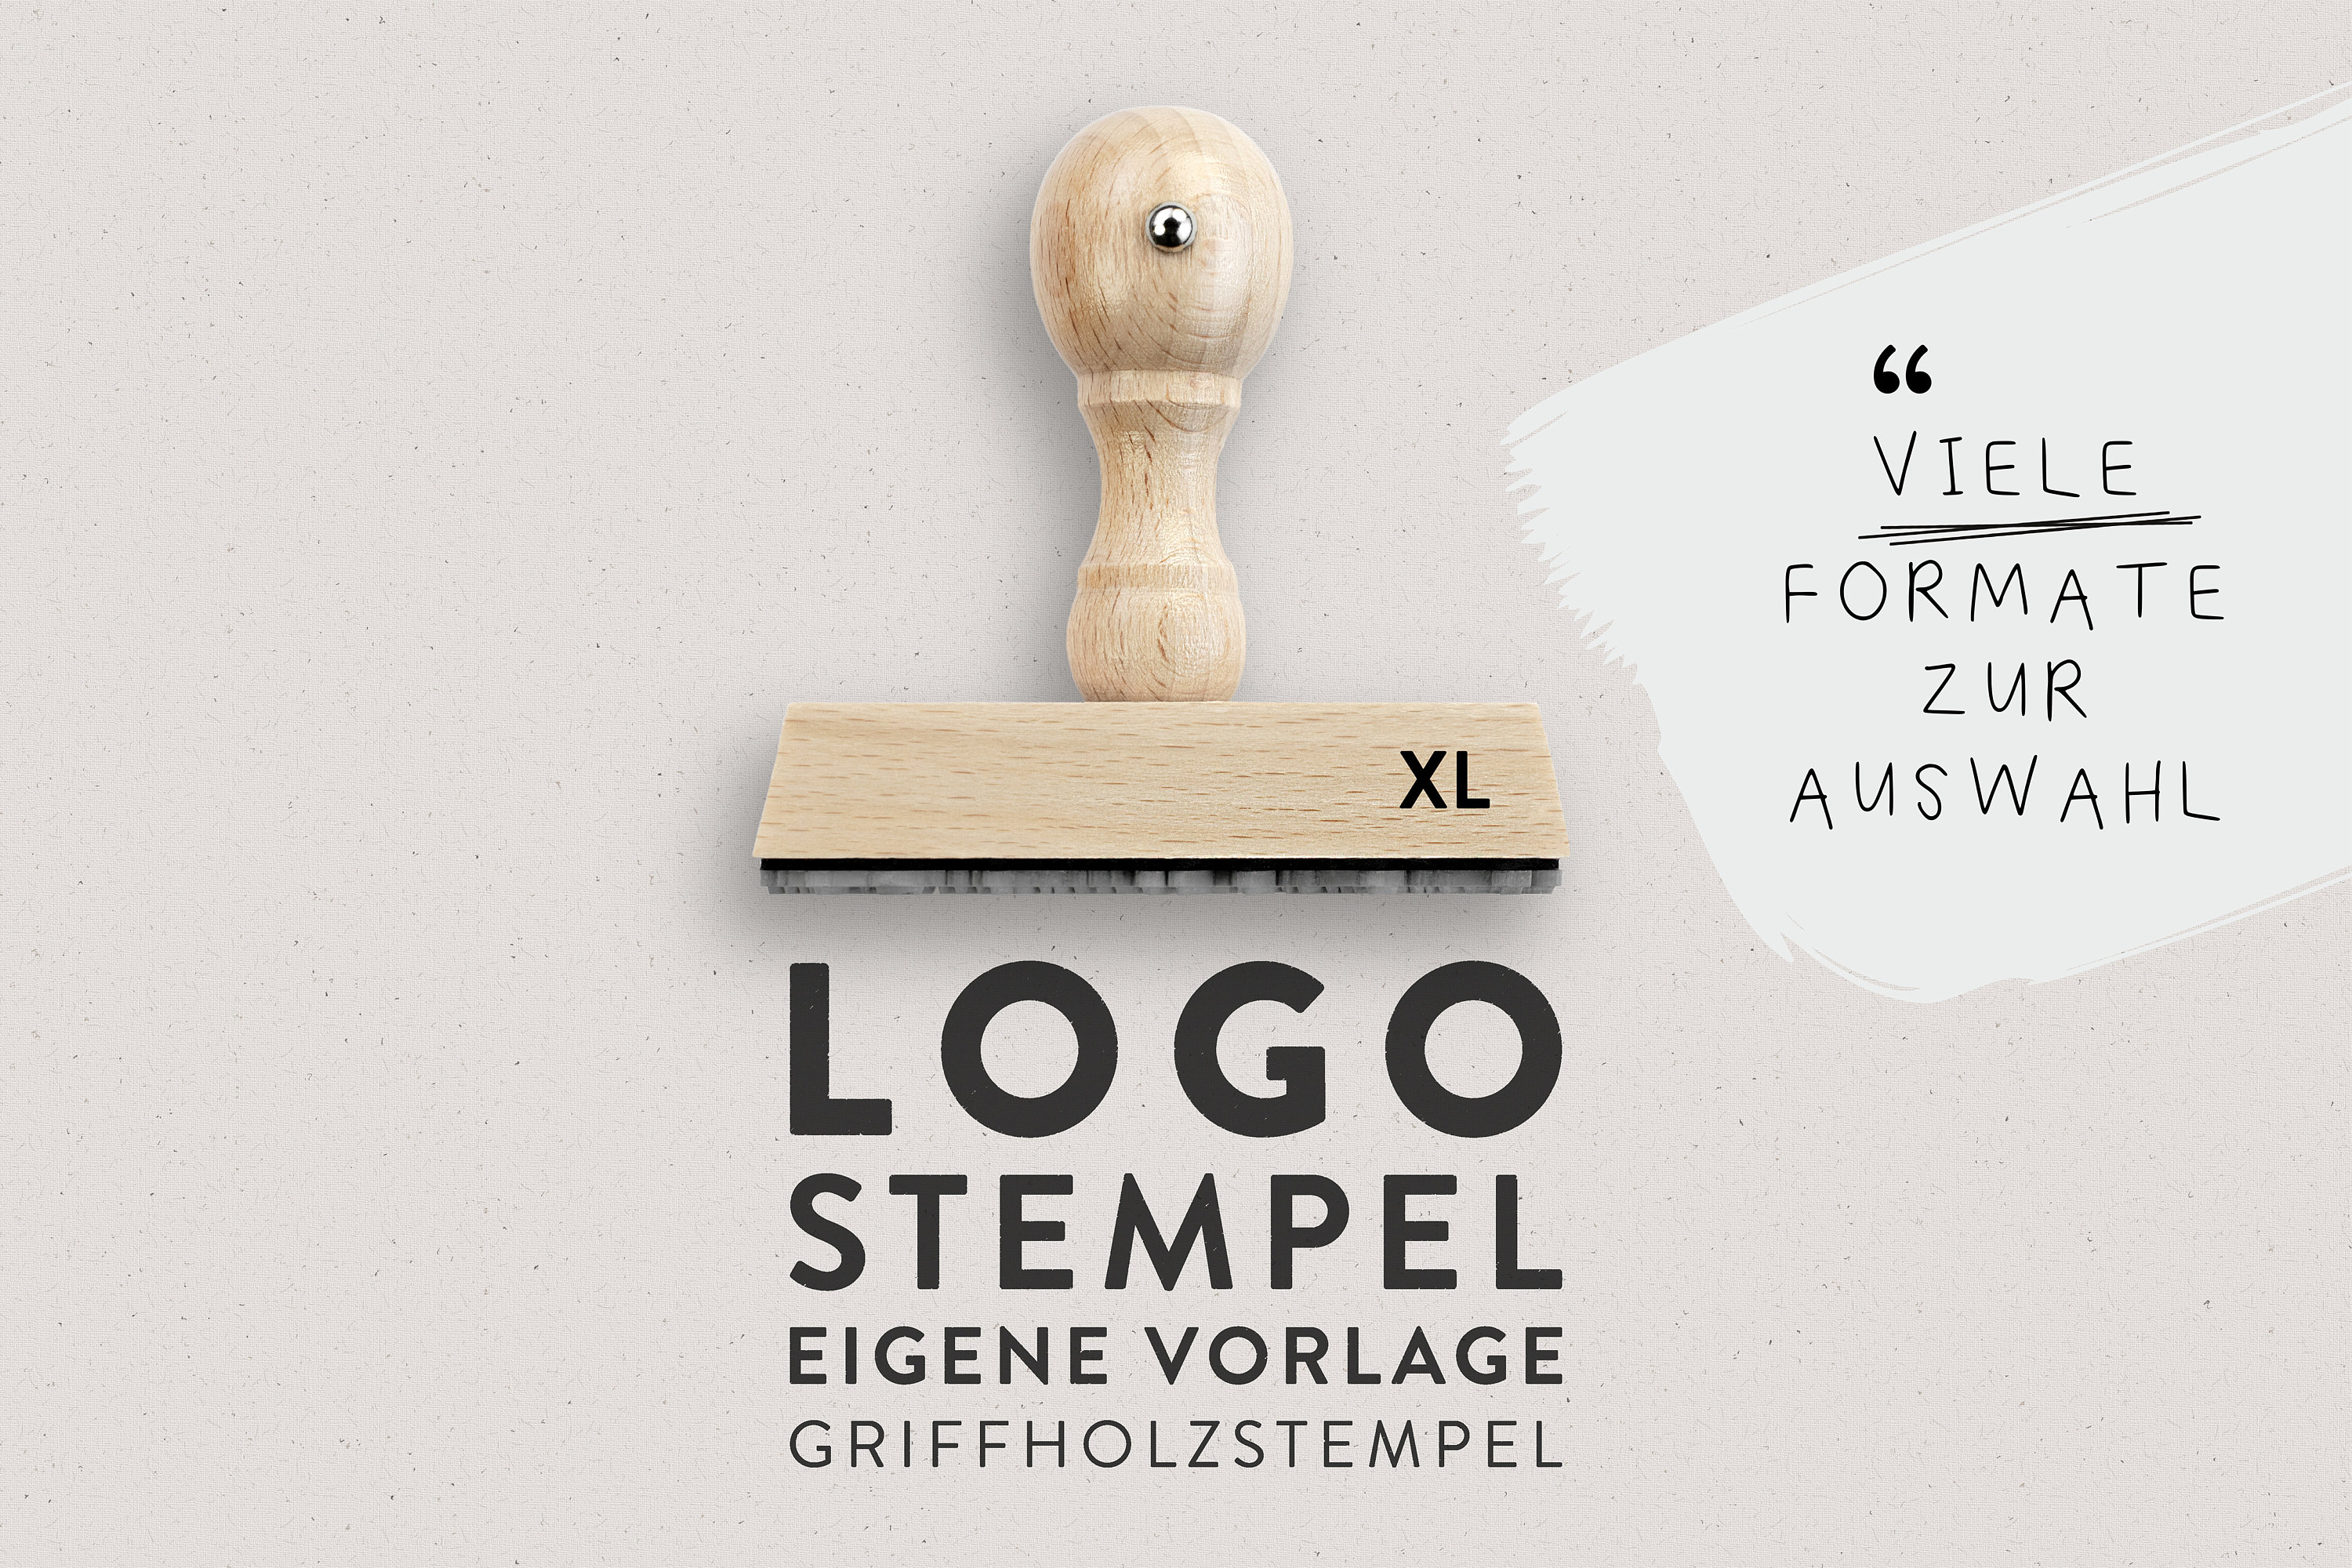 Custom Logo Stamp, Upload a Business Logo, Custom Design, Signature or Make  a Personalized Company Address Stamp, Great for Large Logos 